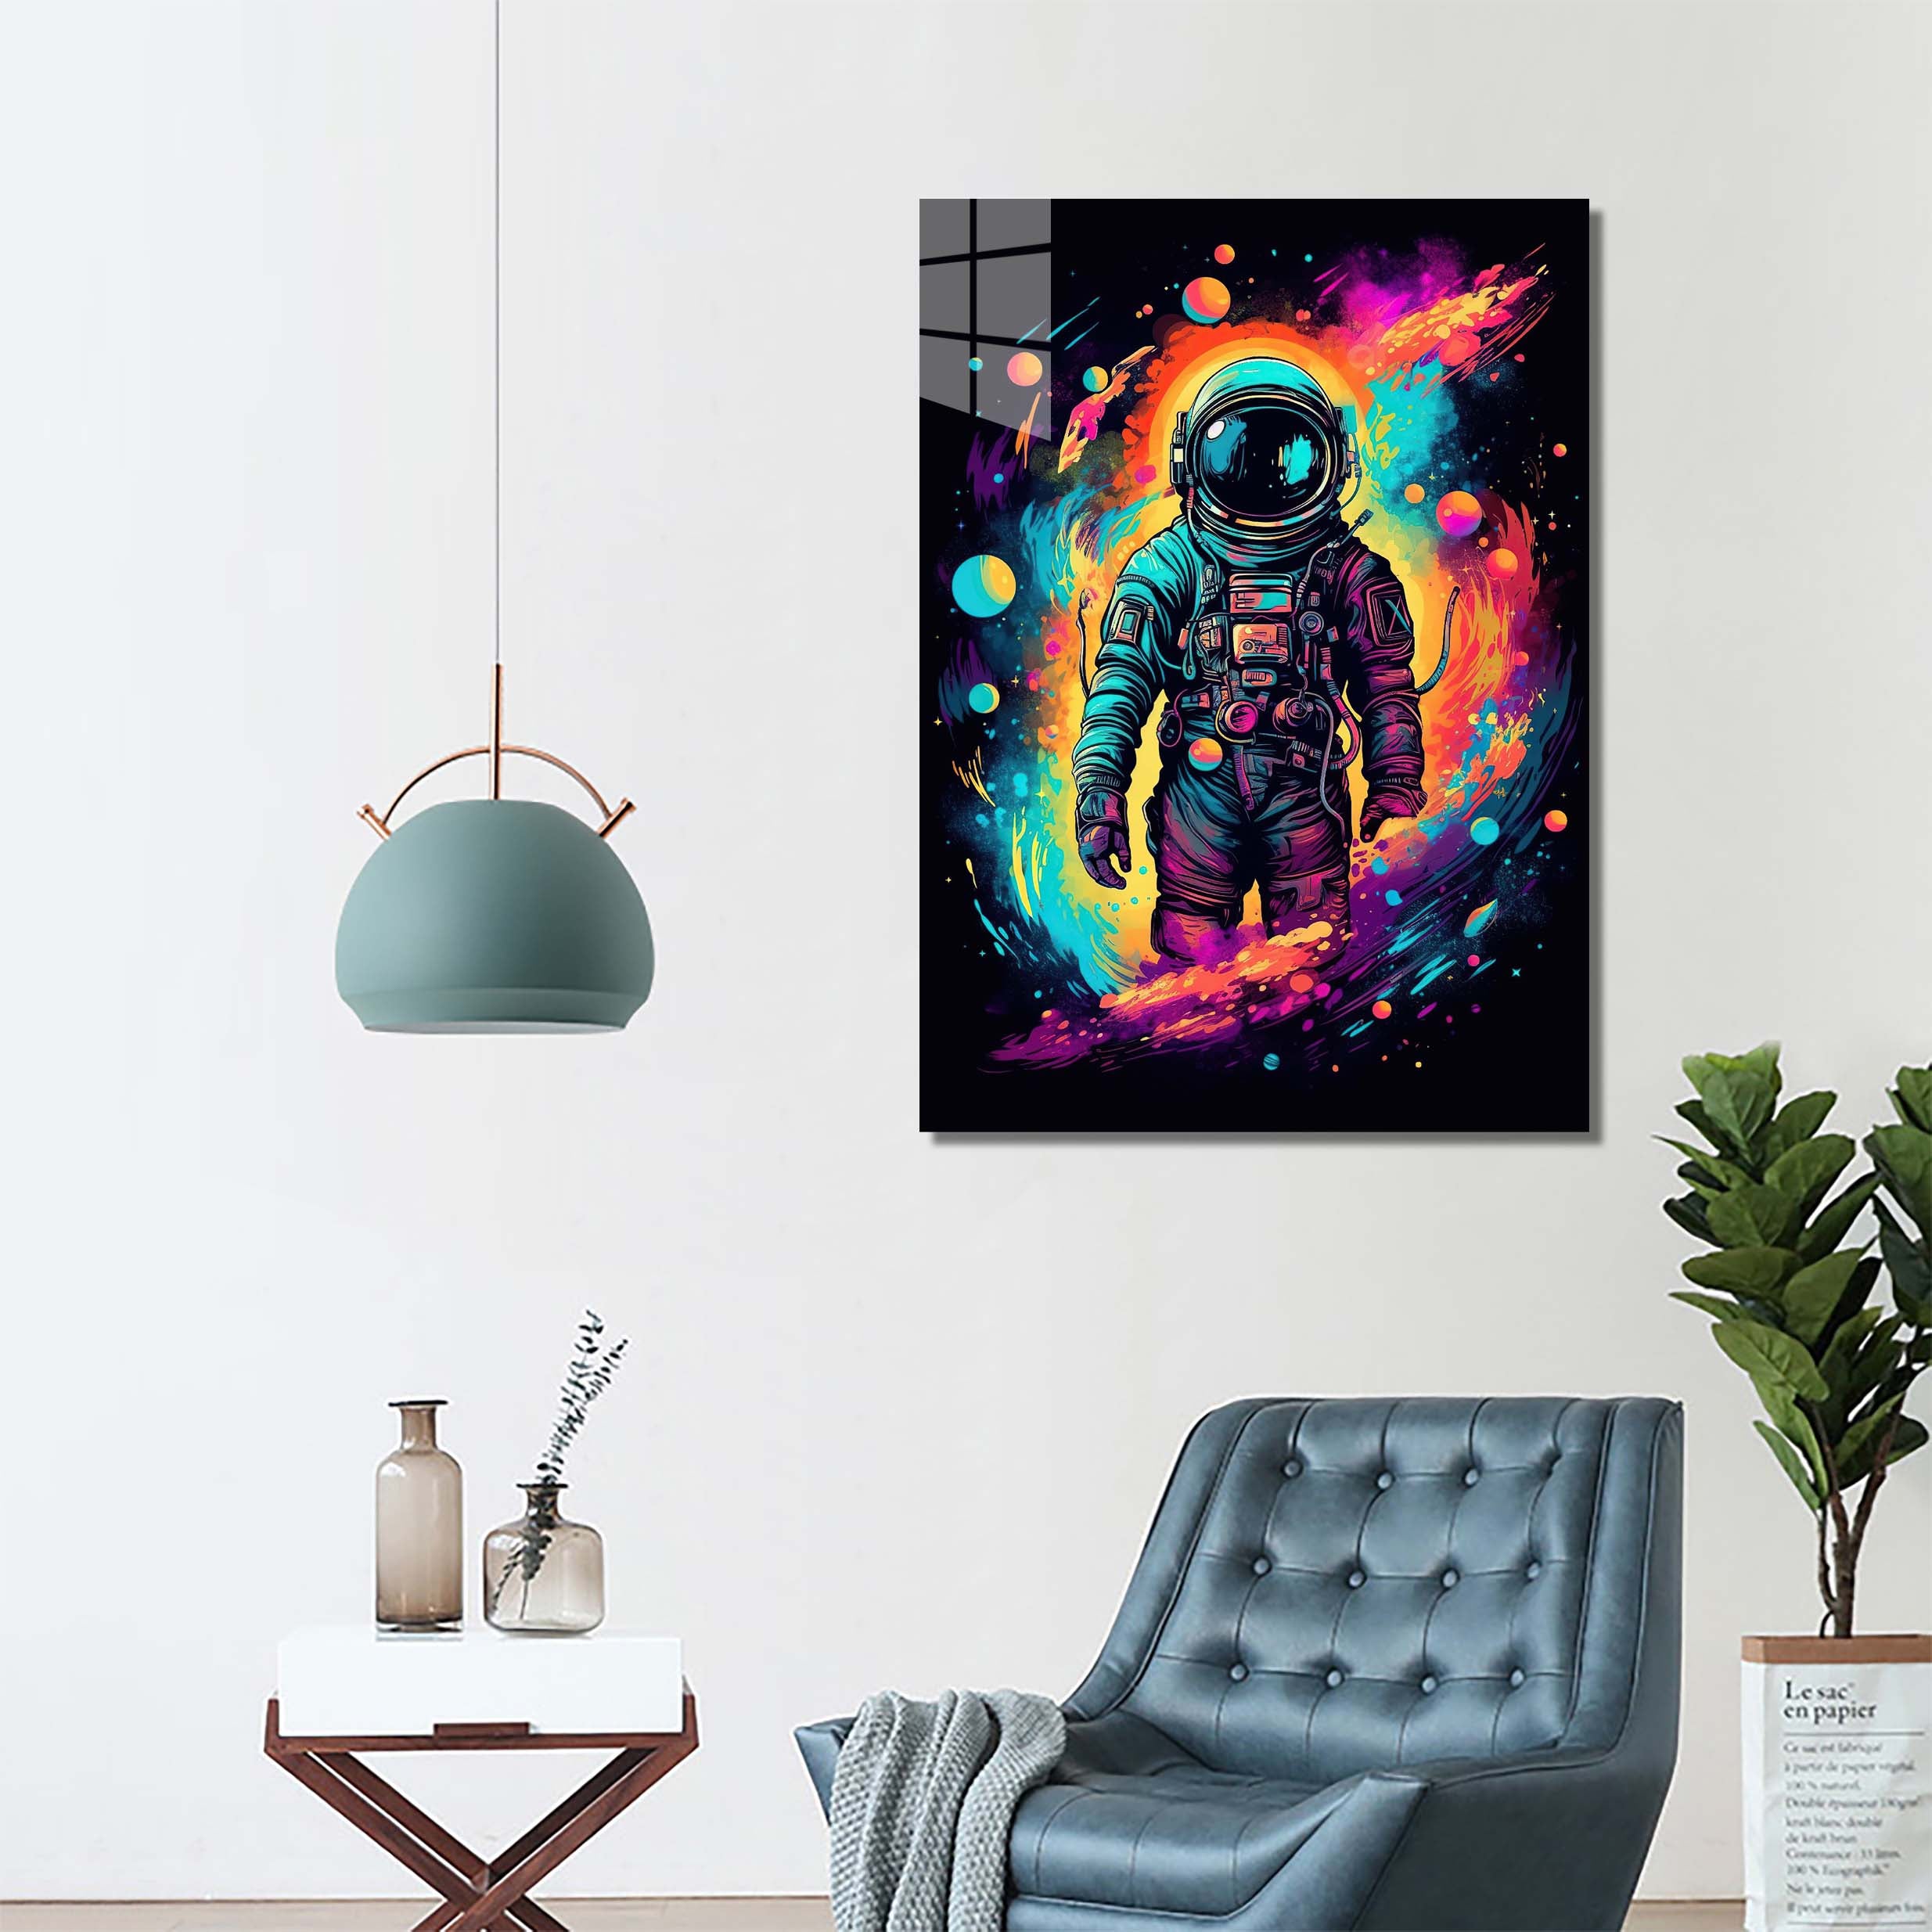 Psychedelic Astronaut 2-designed by @SAMCRO